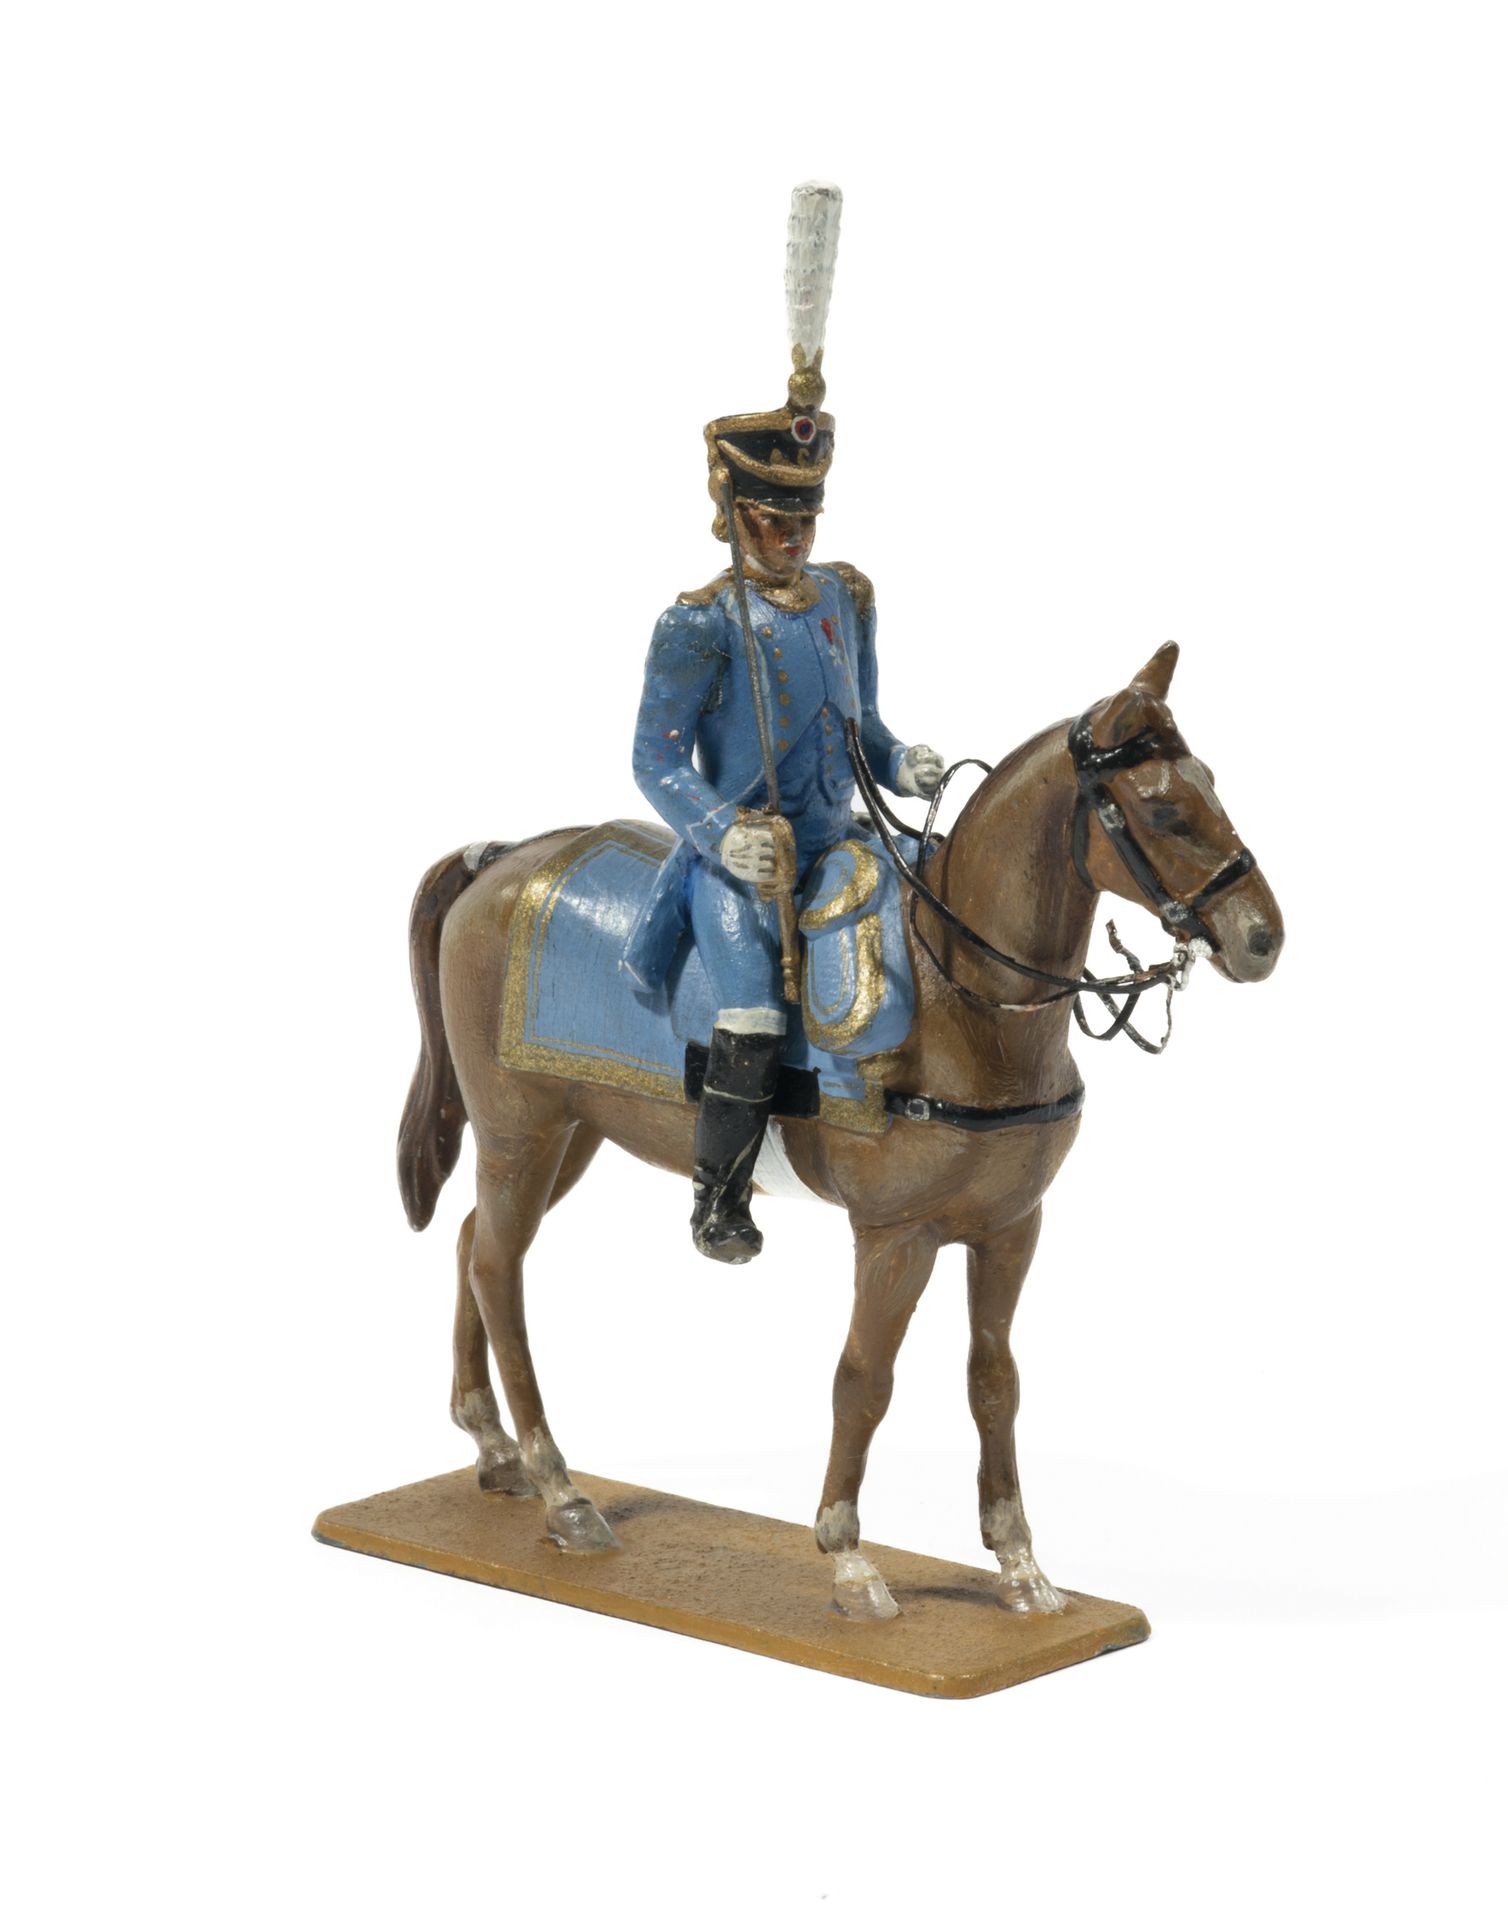 Null Métayer. The Isembourg Regiment. The colonel on horseback (1 fig.).